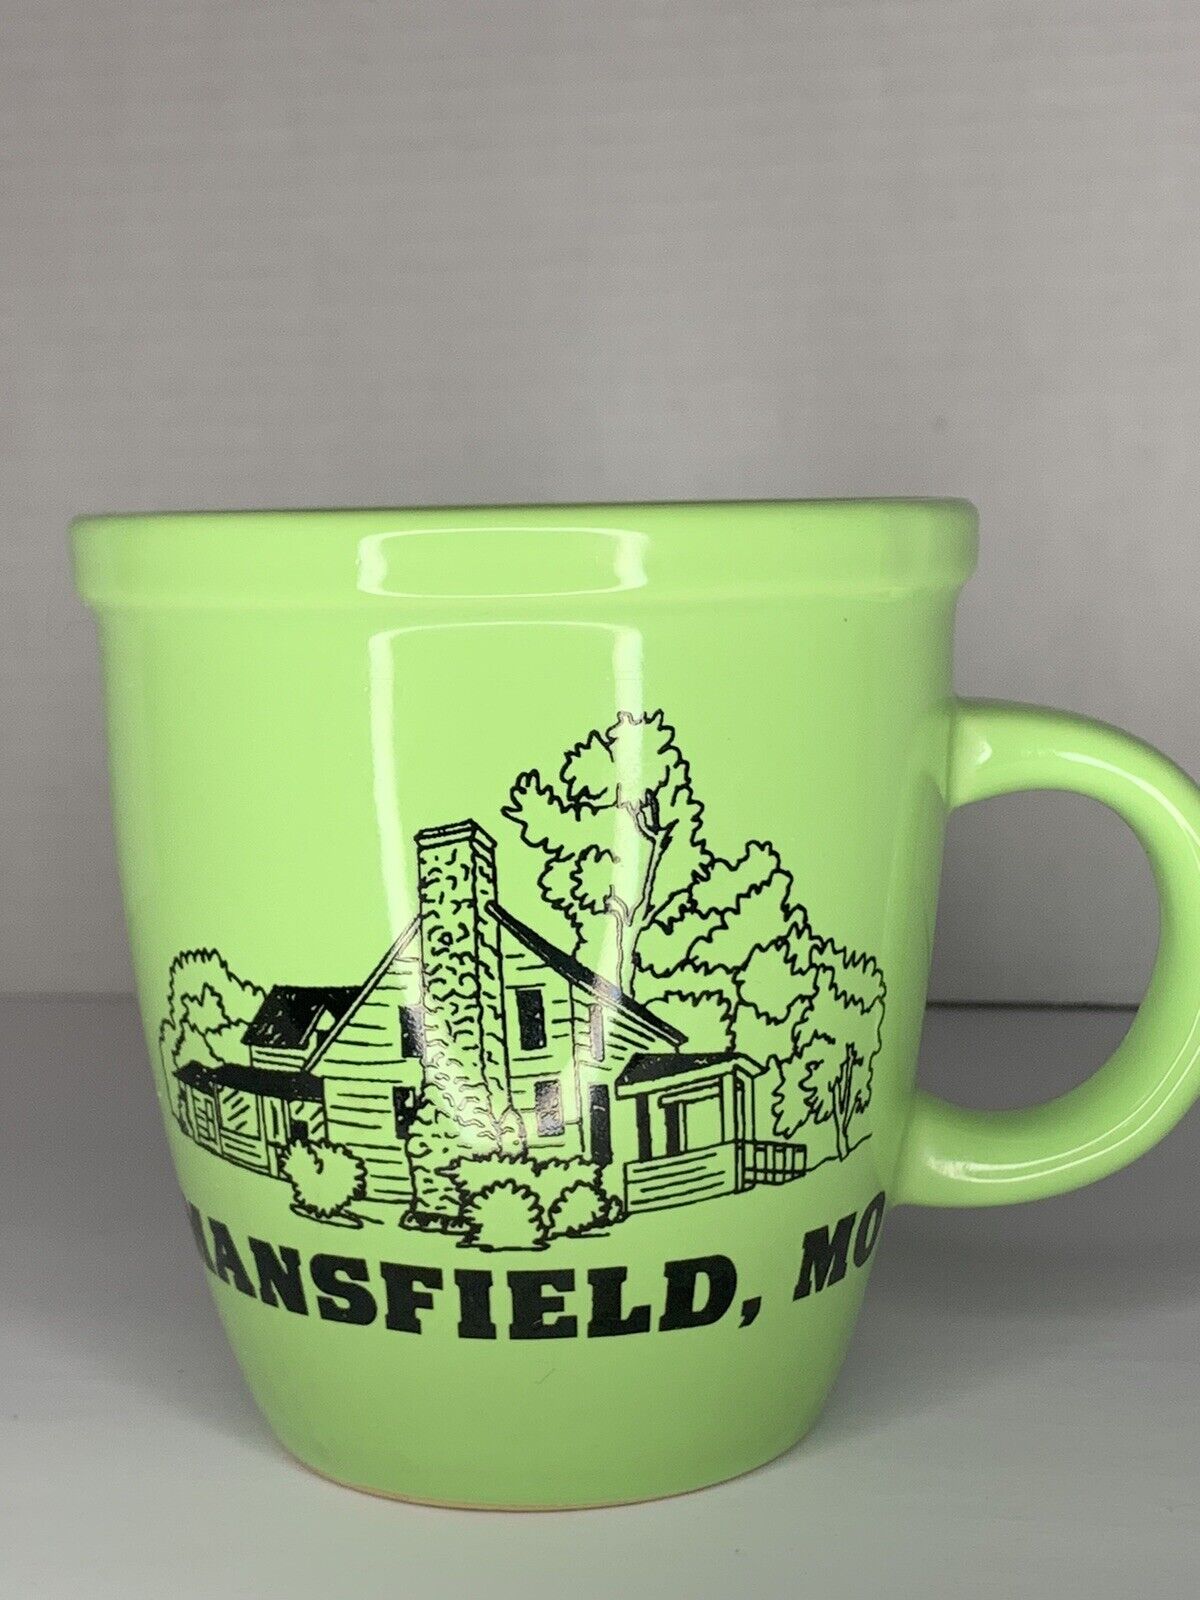 Laura Ingalls Wilder Home Place In Mansfield MO On Green 16 Oz Coffee Mug